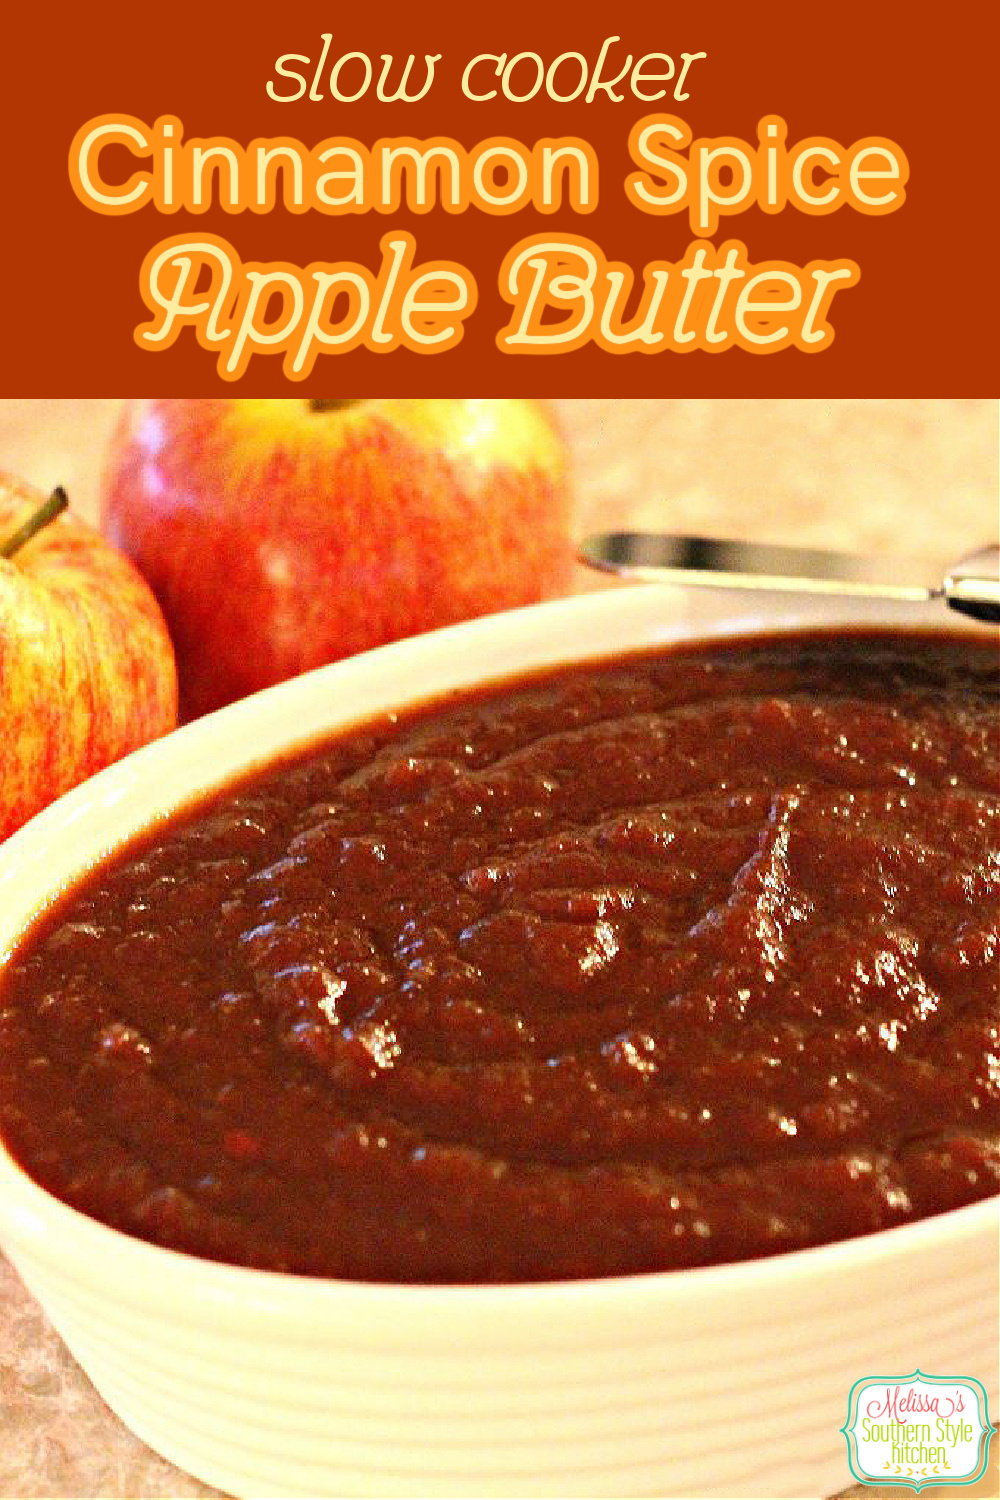 Simmer this sweet and cinnamon spiced apple butter in your slow cooker and the house will smell wonderful, too! #applebutter #apples #slowcooked #slowcooker #crockpot #brunch #jams #breakfast #appleseason #harvest #southernfood #southernrecipes